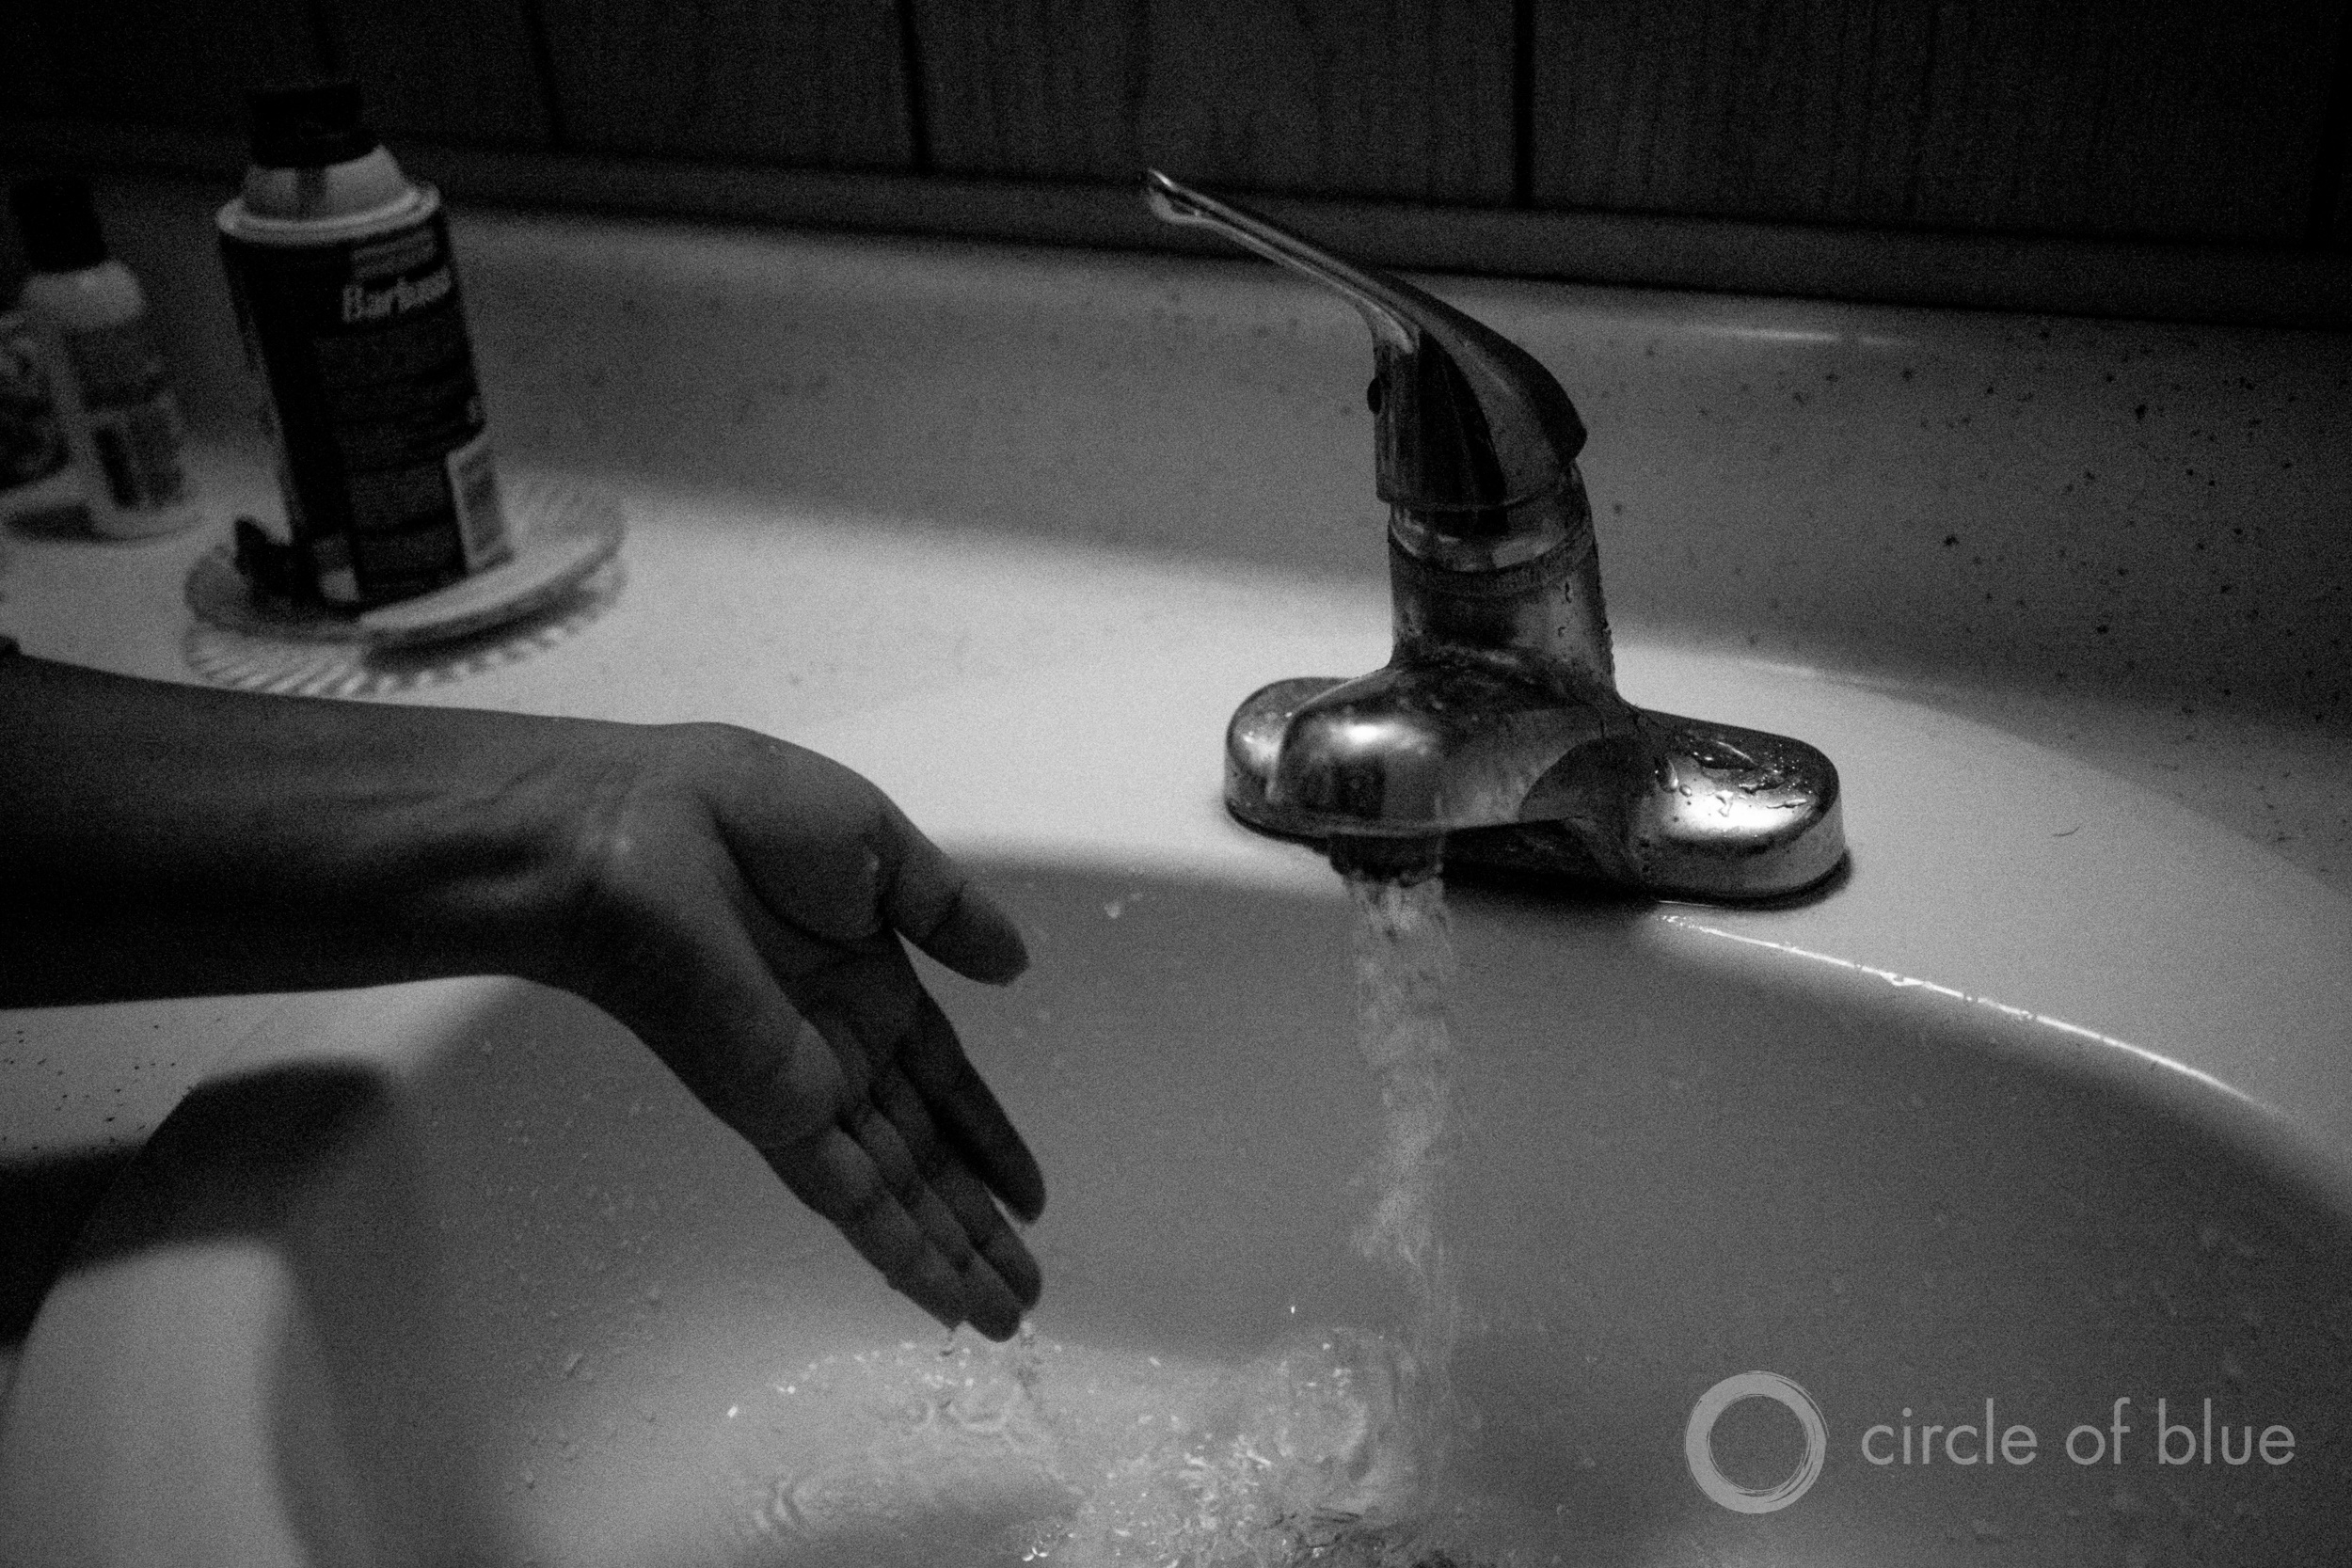 California officials are developing the nation's first state program to assist poor families who have trouble paying their water bill. Photo © Matt Black